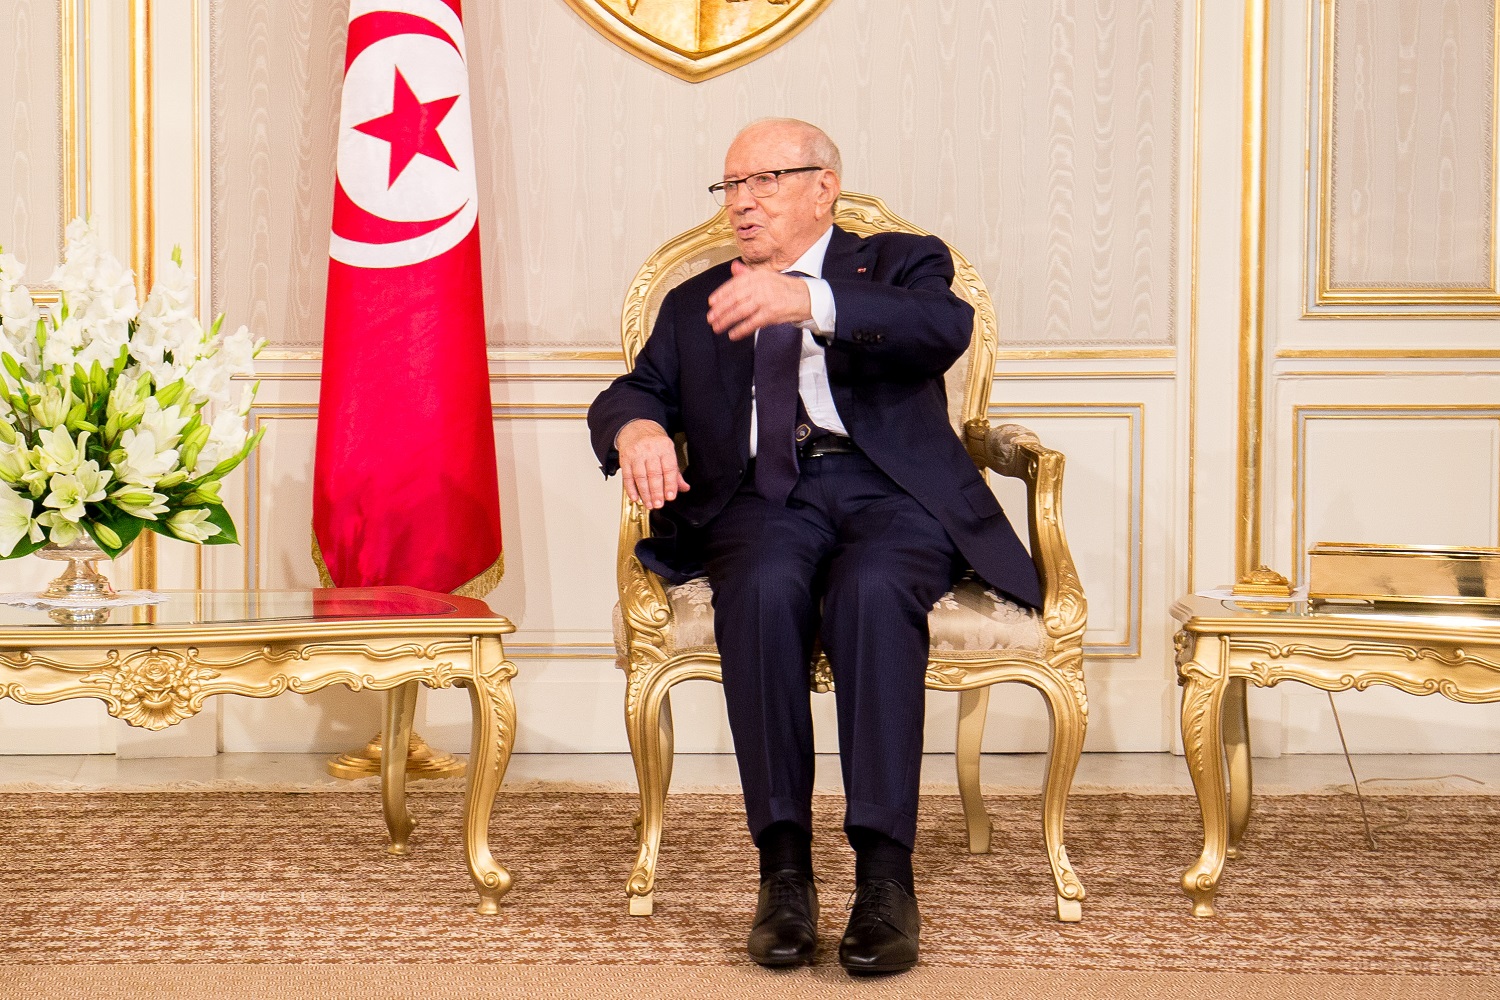 Health of Tunisian president improved significantly - presidency spokeswoman